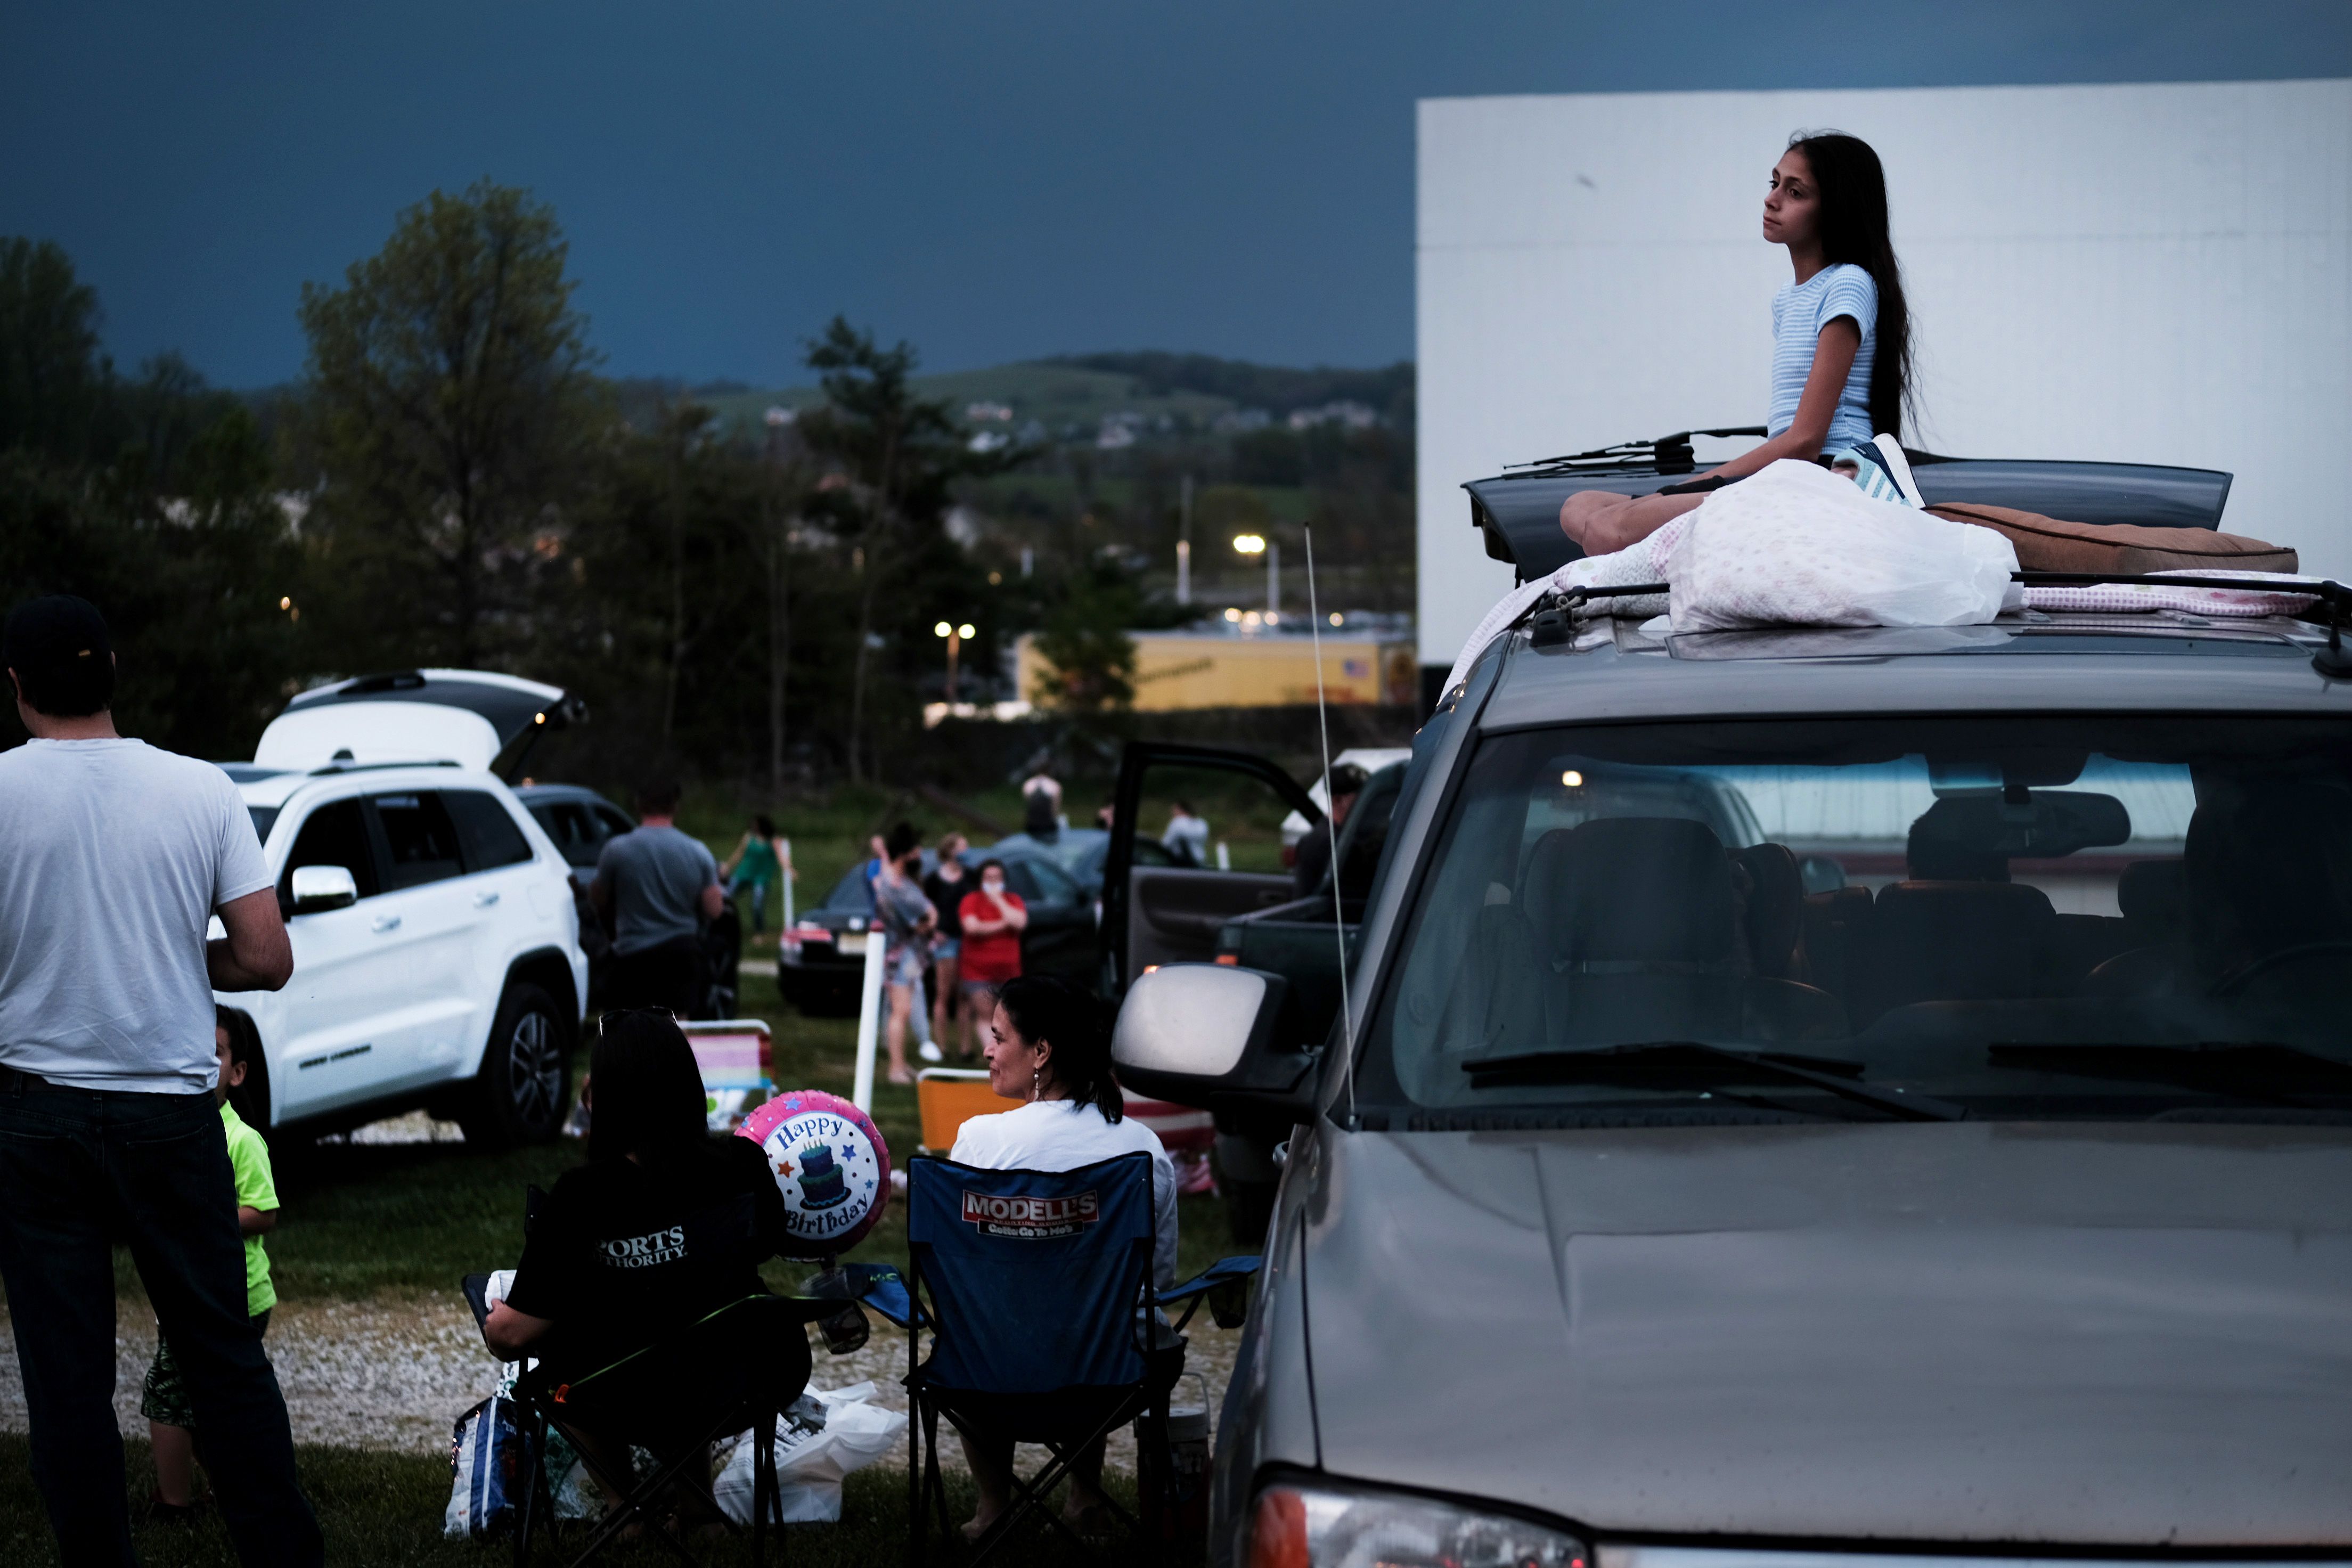 In this image, a girl sits on top of a car 